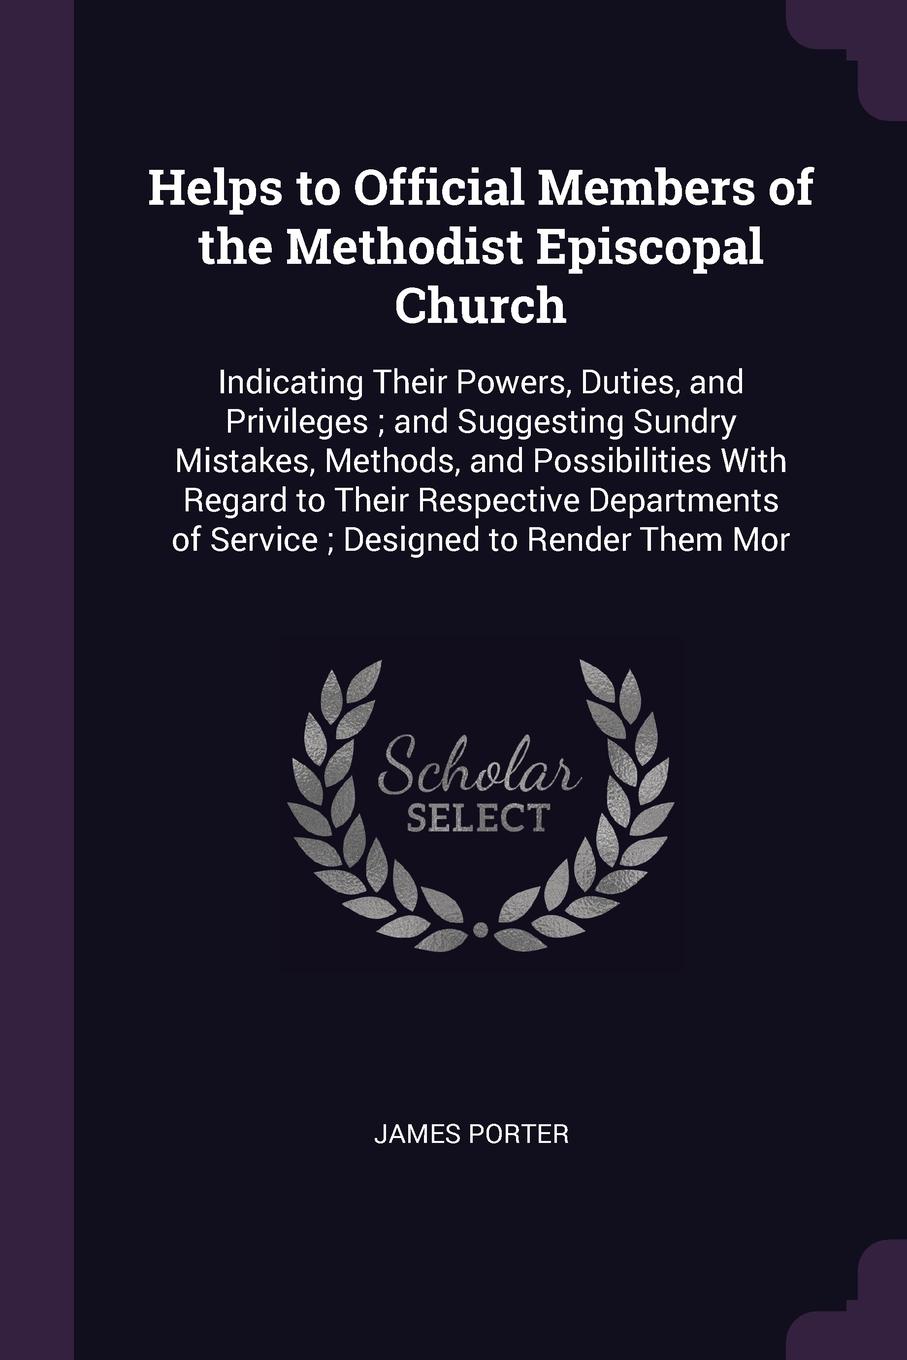 Helps to Official Members of the Methodist Episcopal Church. Indicating Their Powers, Duties, and Privileges ; and Suggesting Sundry Mistakes, Methods, and Possibilities With Regard to Their Respective Departments of Service ; Designed to Render T...